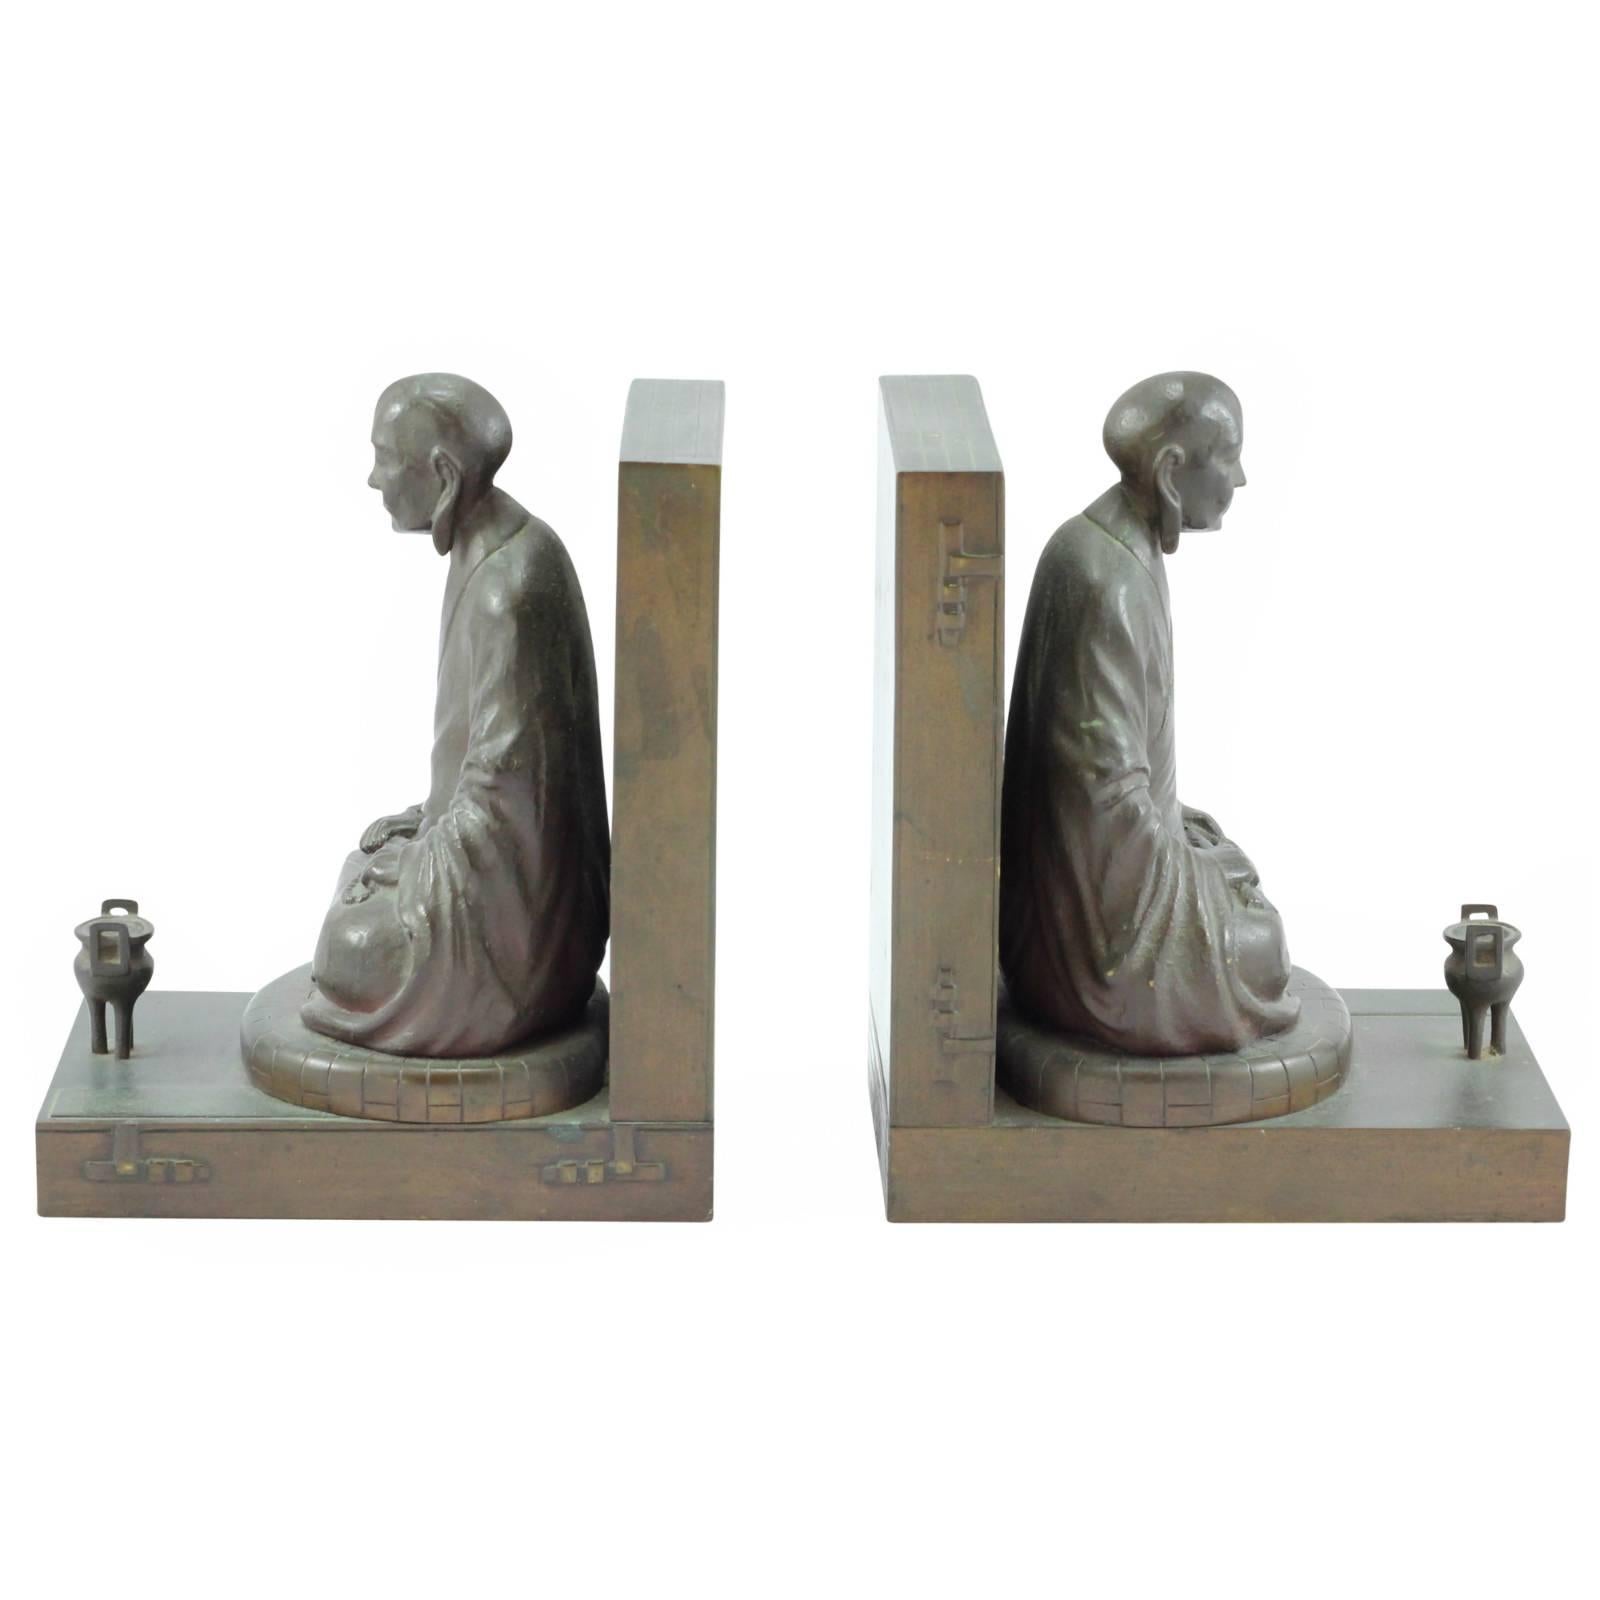 Modelled in bronze as two monks seated in meditation before tripod incense censors. They are seated upon and backed by Japanese books cast in bronze. Both have closed eyes and carry beads and scrolls in their hands.